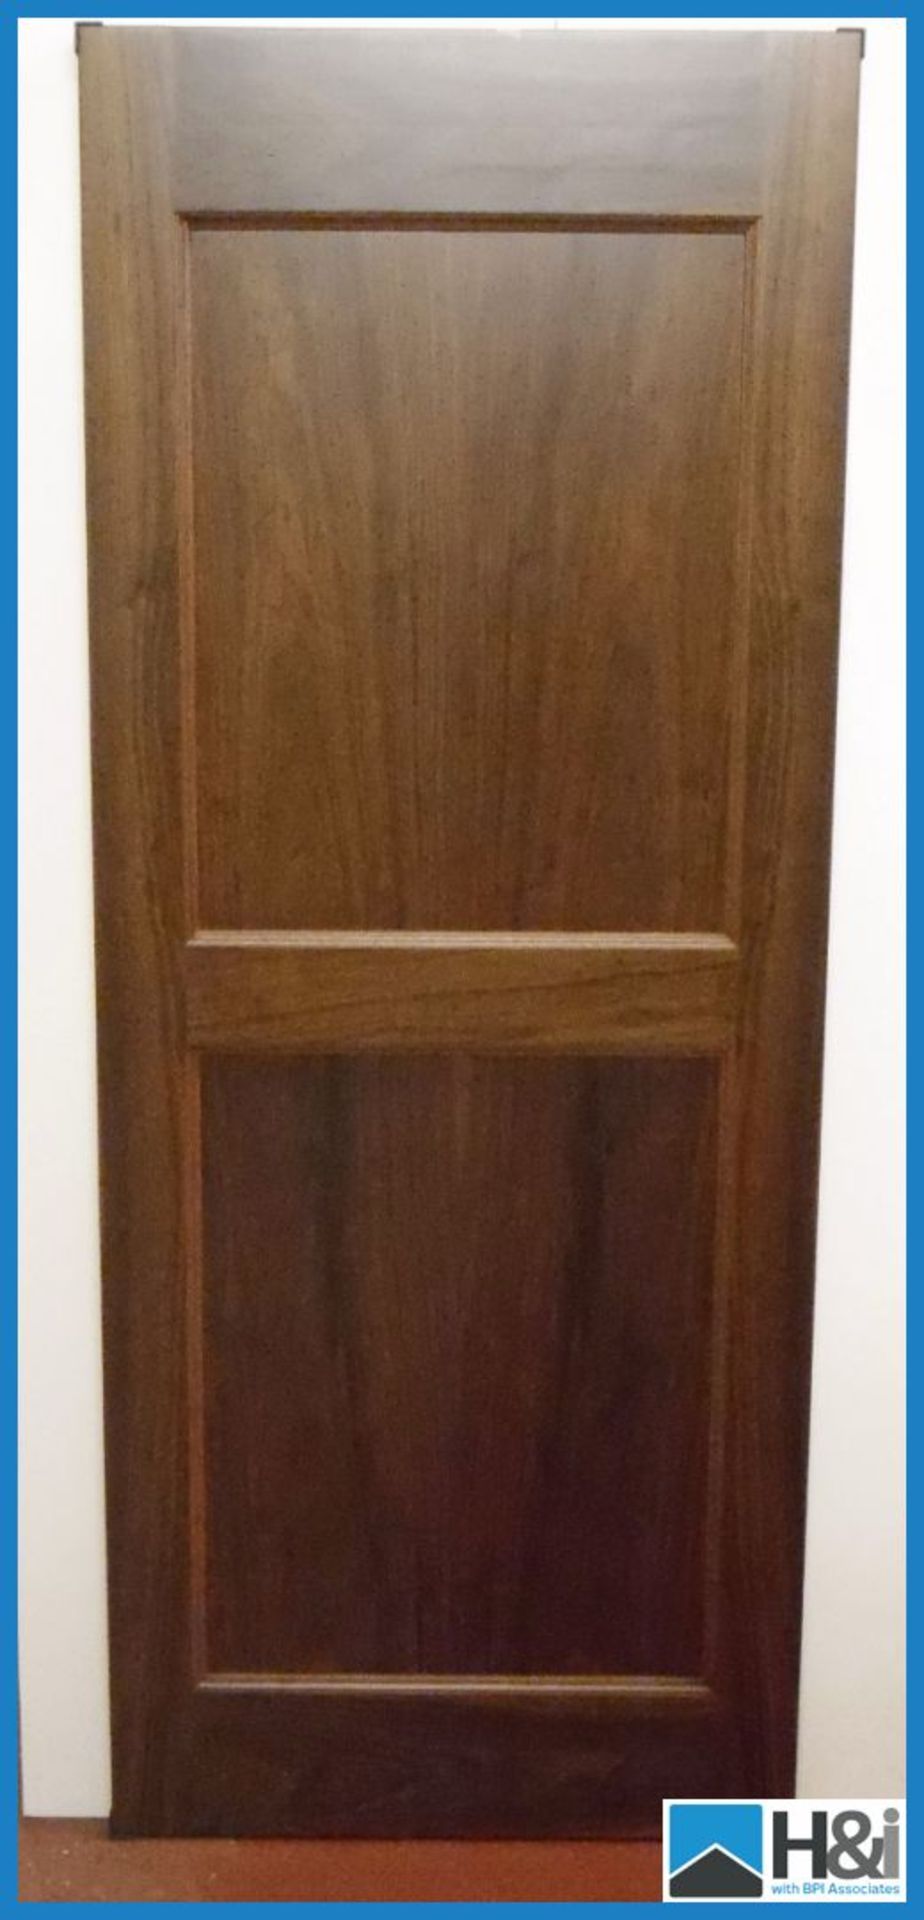 Brand new in sealed packaging Walnut 'Arden' exterior door 78" x 33" 44mm thickness with two flat - Image 3 of 4